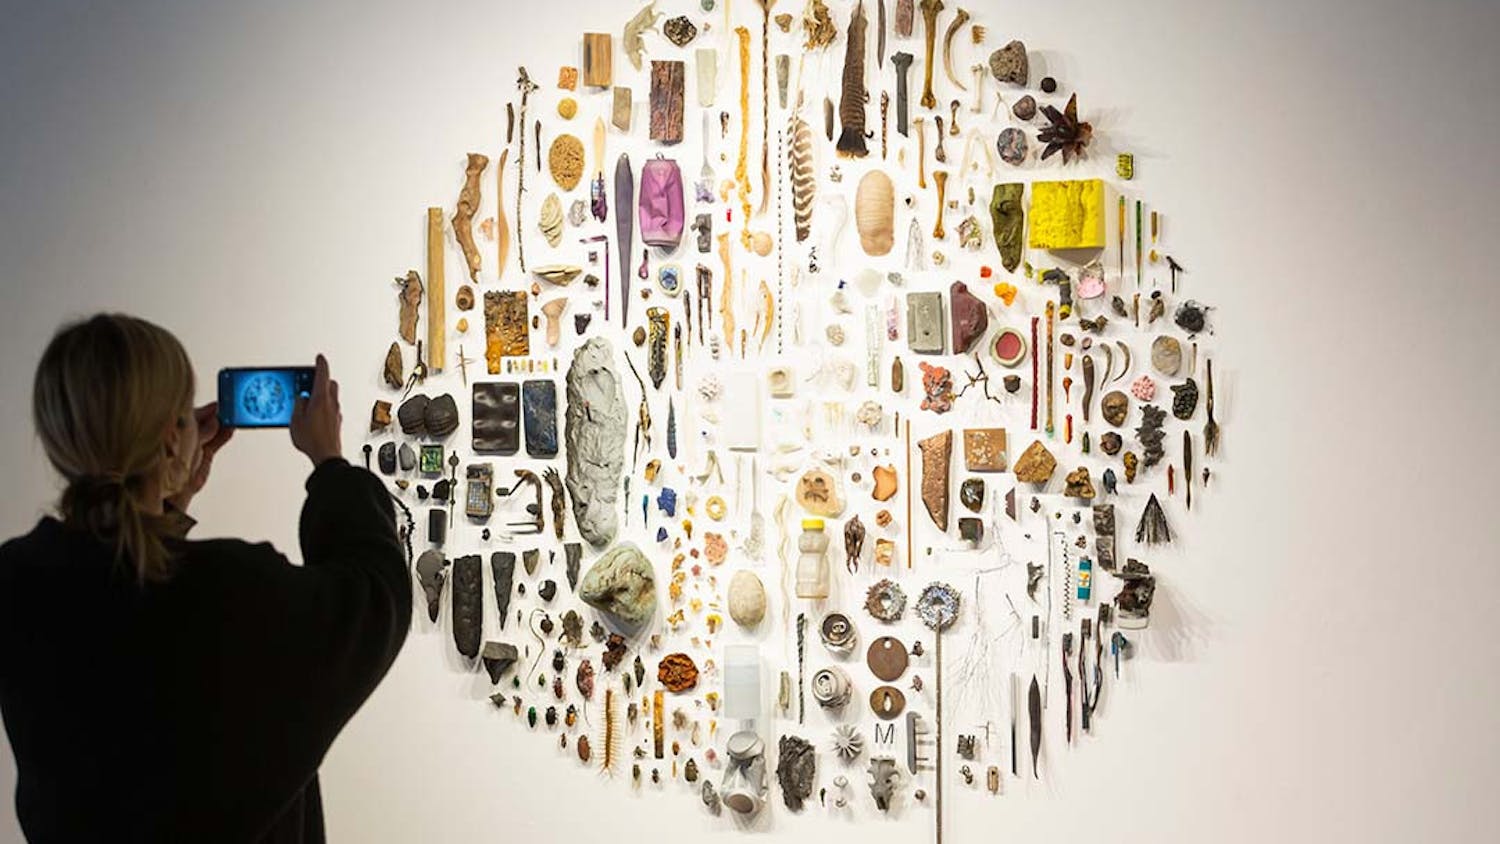 A visitor takes a photo of "Some Things" by Christopher Mahonski in the Voyage of Life exhibit featured in the McMaster Gallery. The sculpture is a collection of found and fabricated materials to explore the subject of ecological uncertainty.